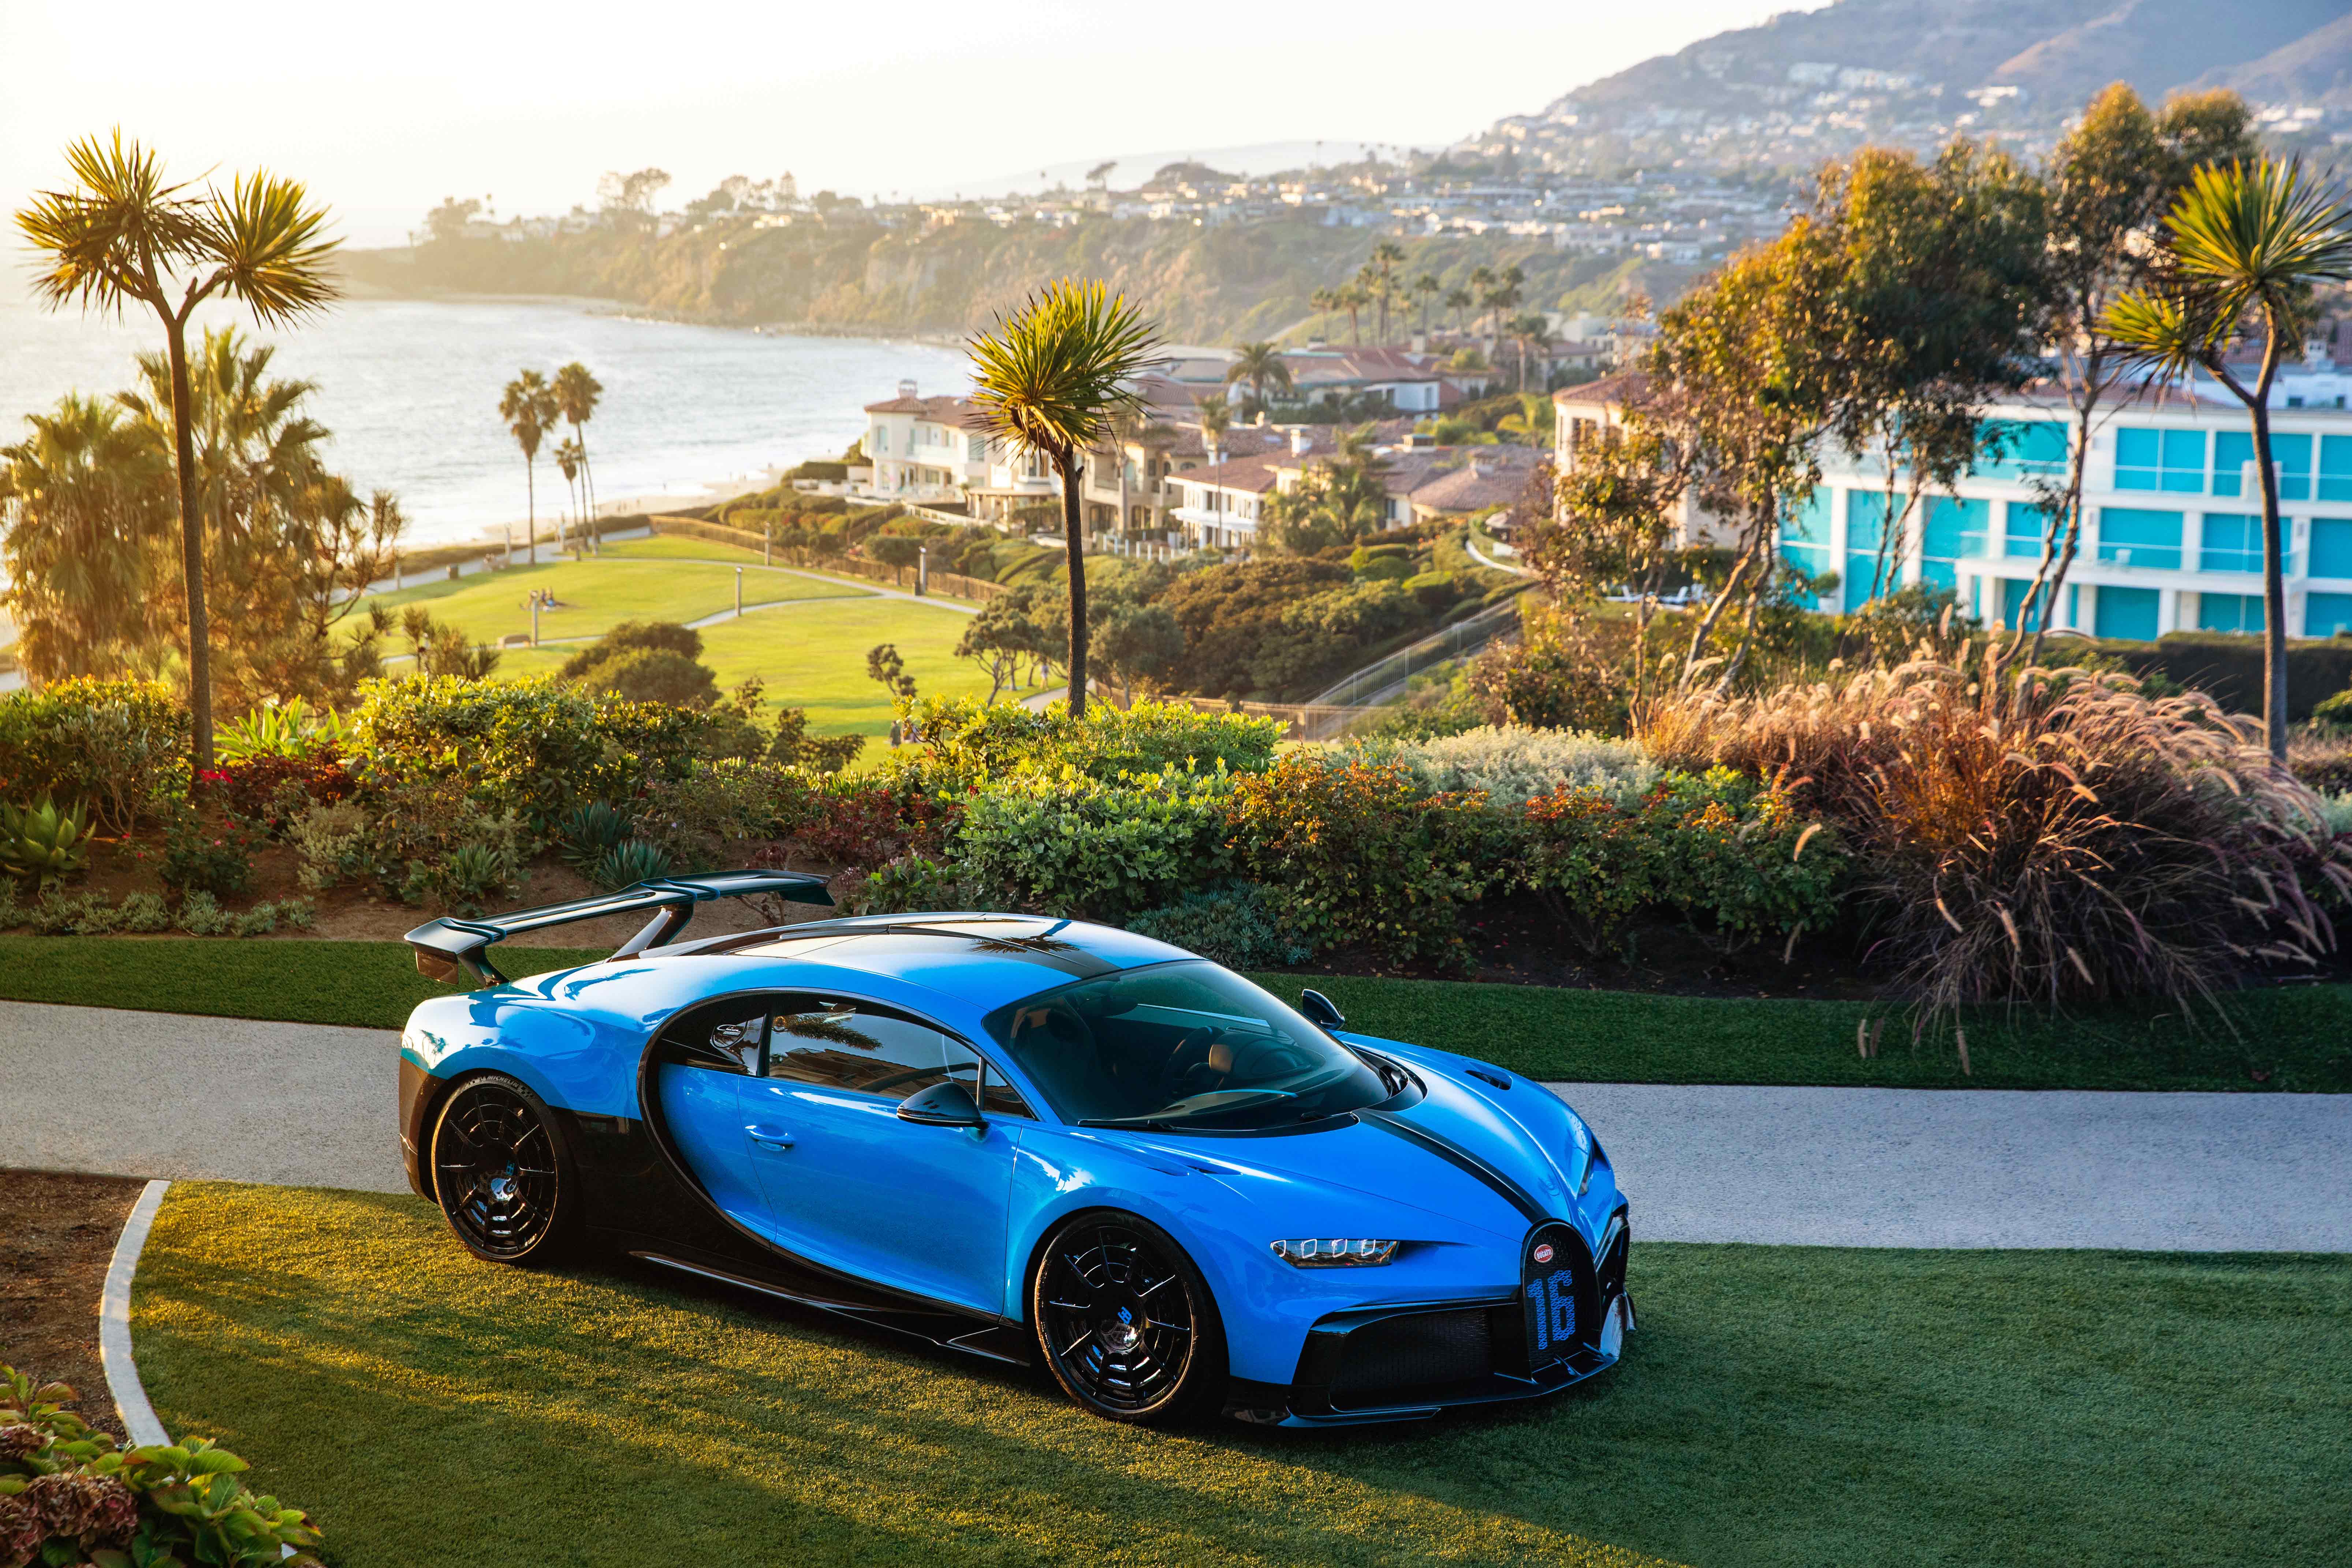 Exclusive US Roadshow - The Chiron Pur Sport continues its journey through California